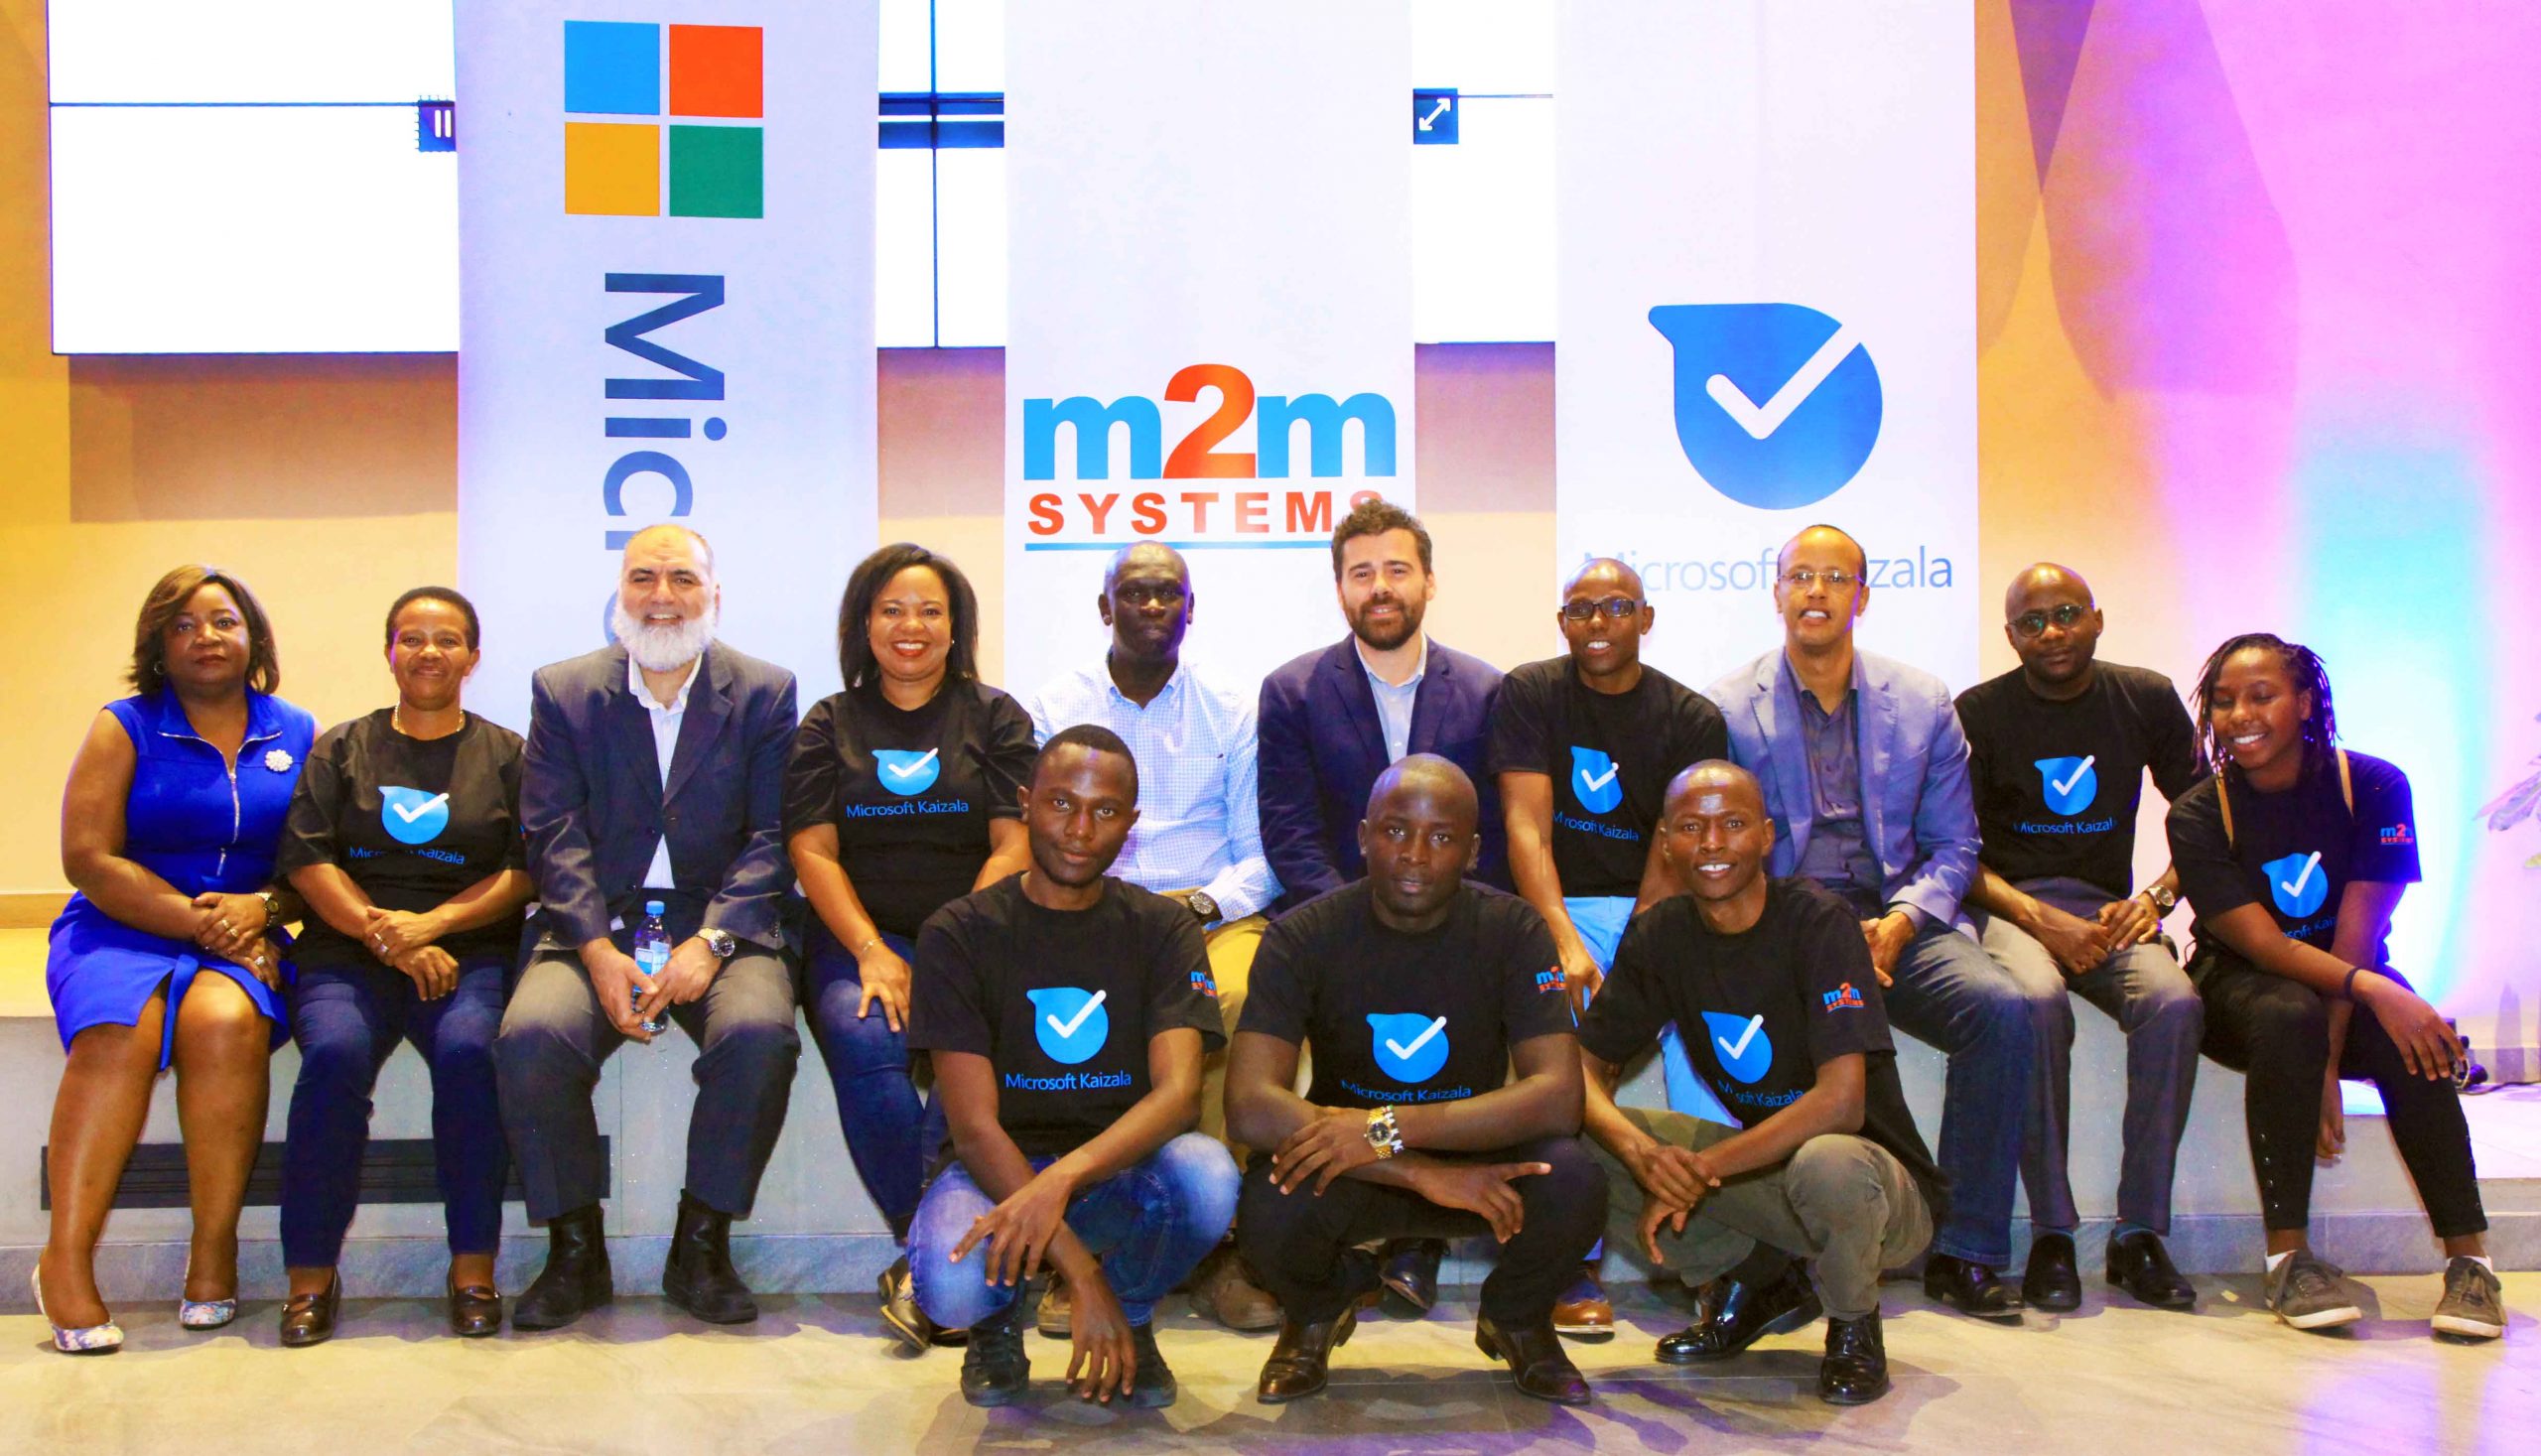 Teams from M2M Systems and Microsoft take a group photo